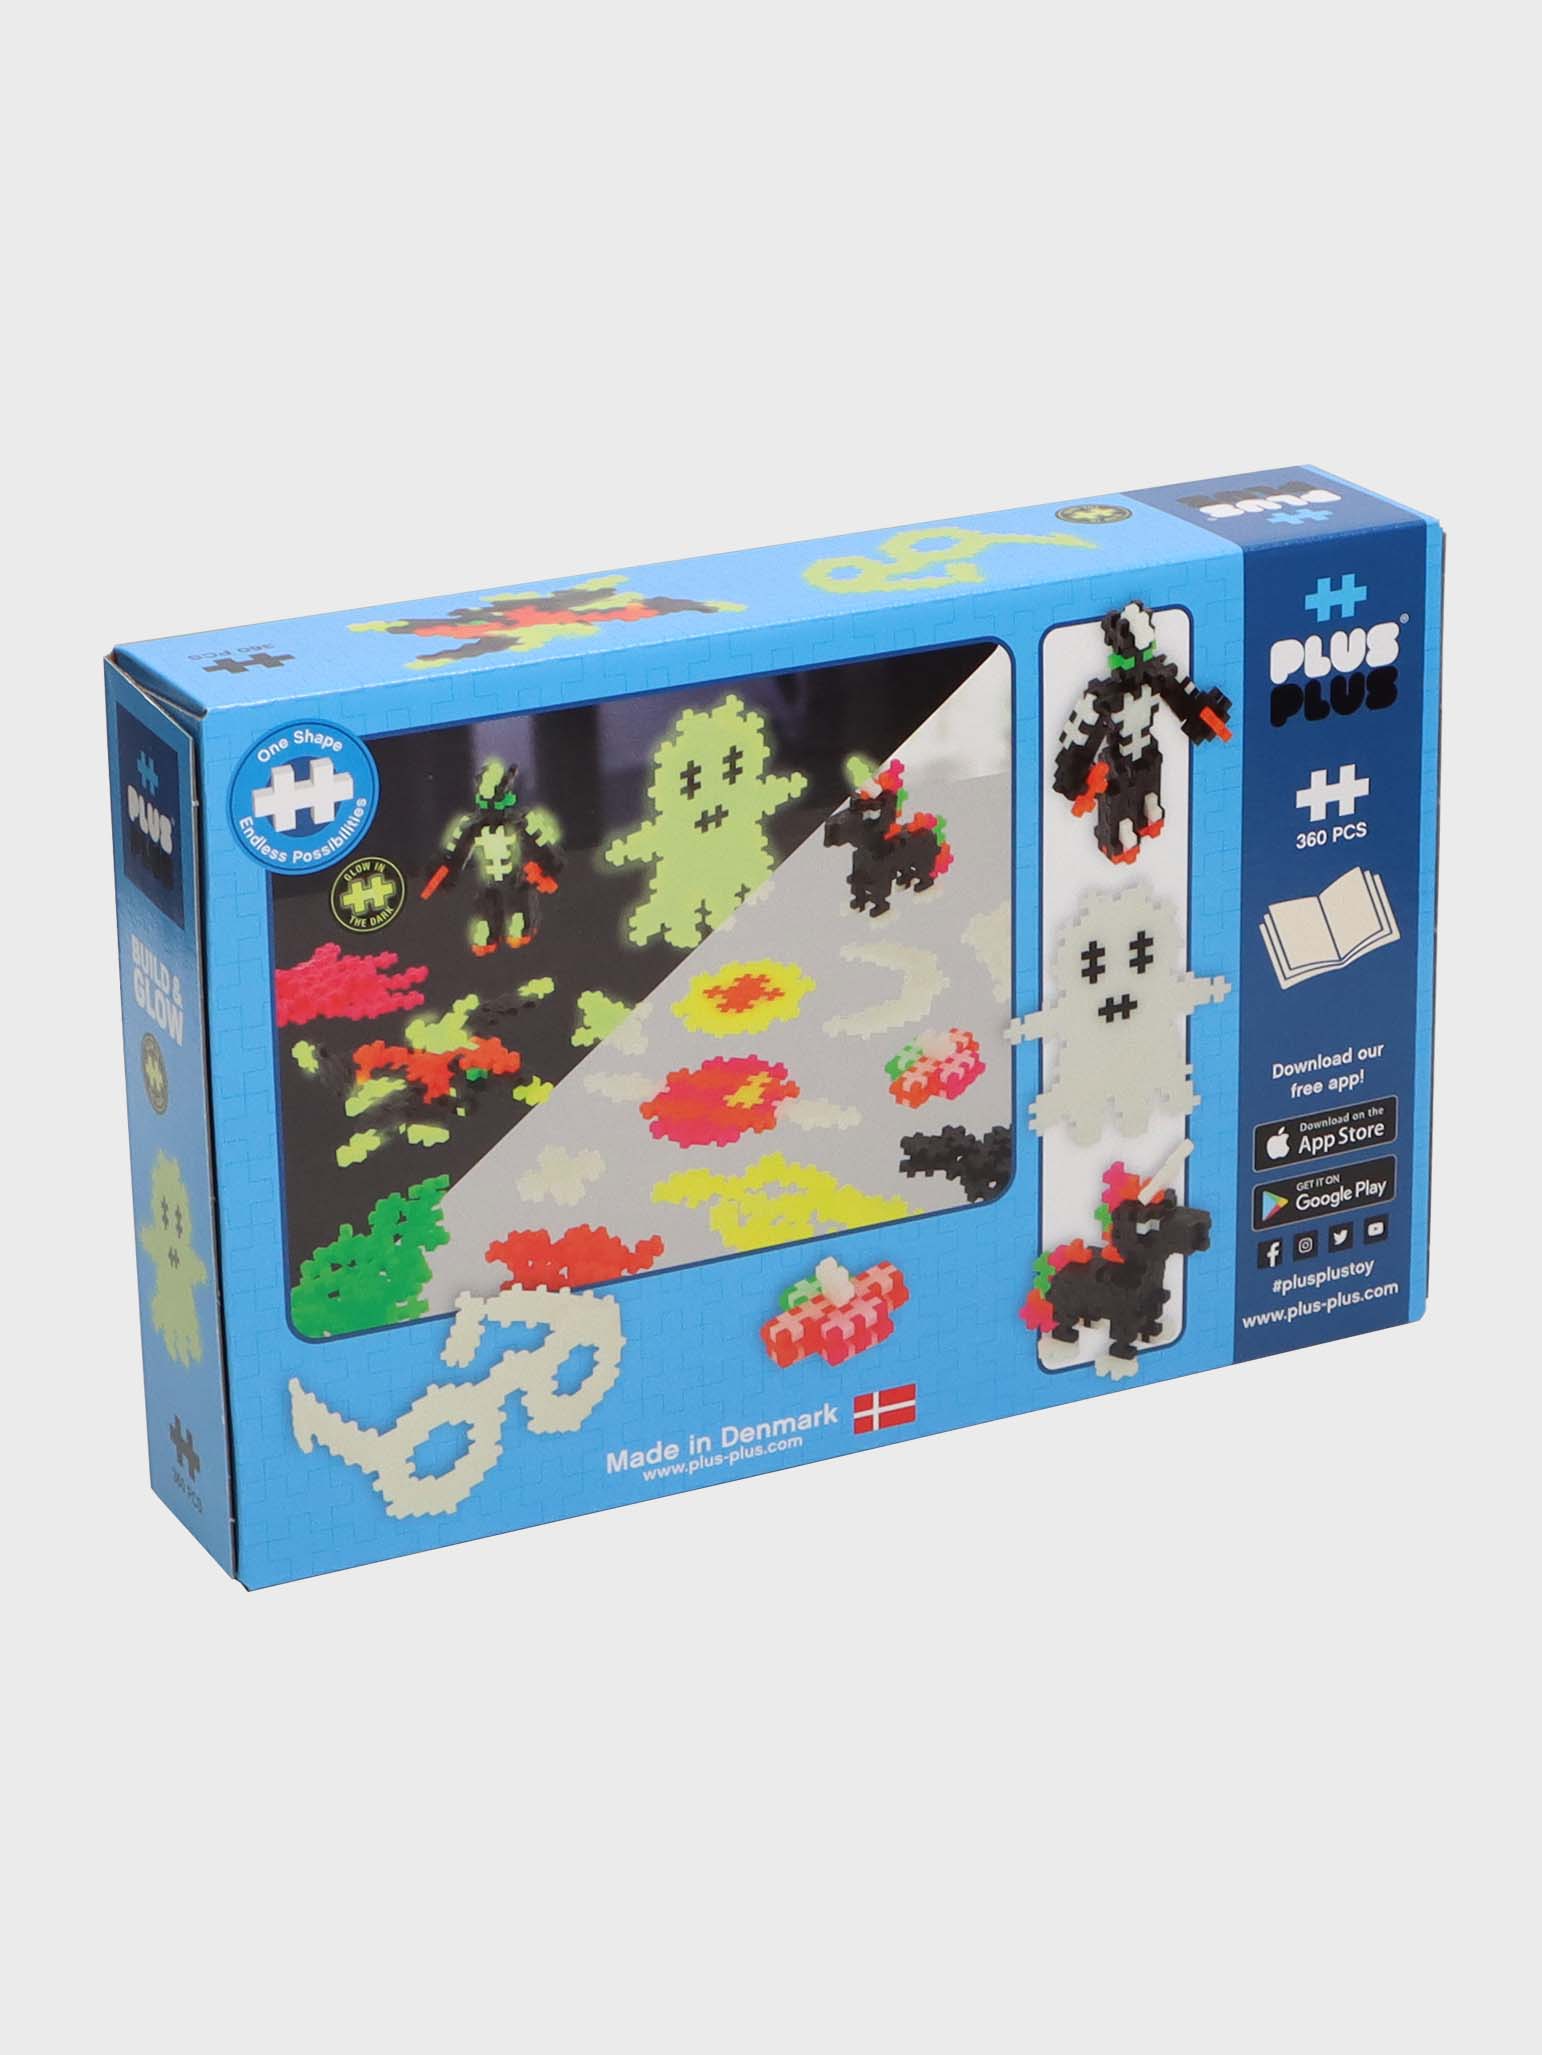 Build and Glow - Glow in the Dark 360pcs